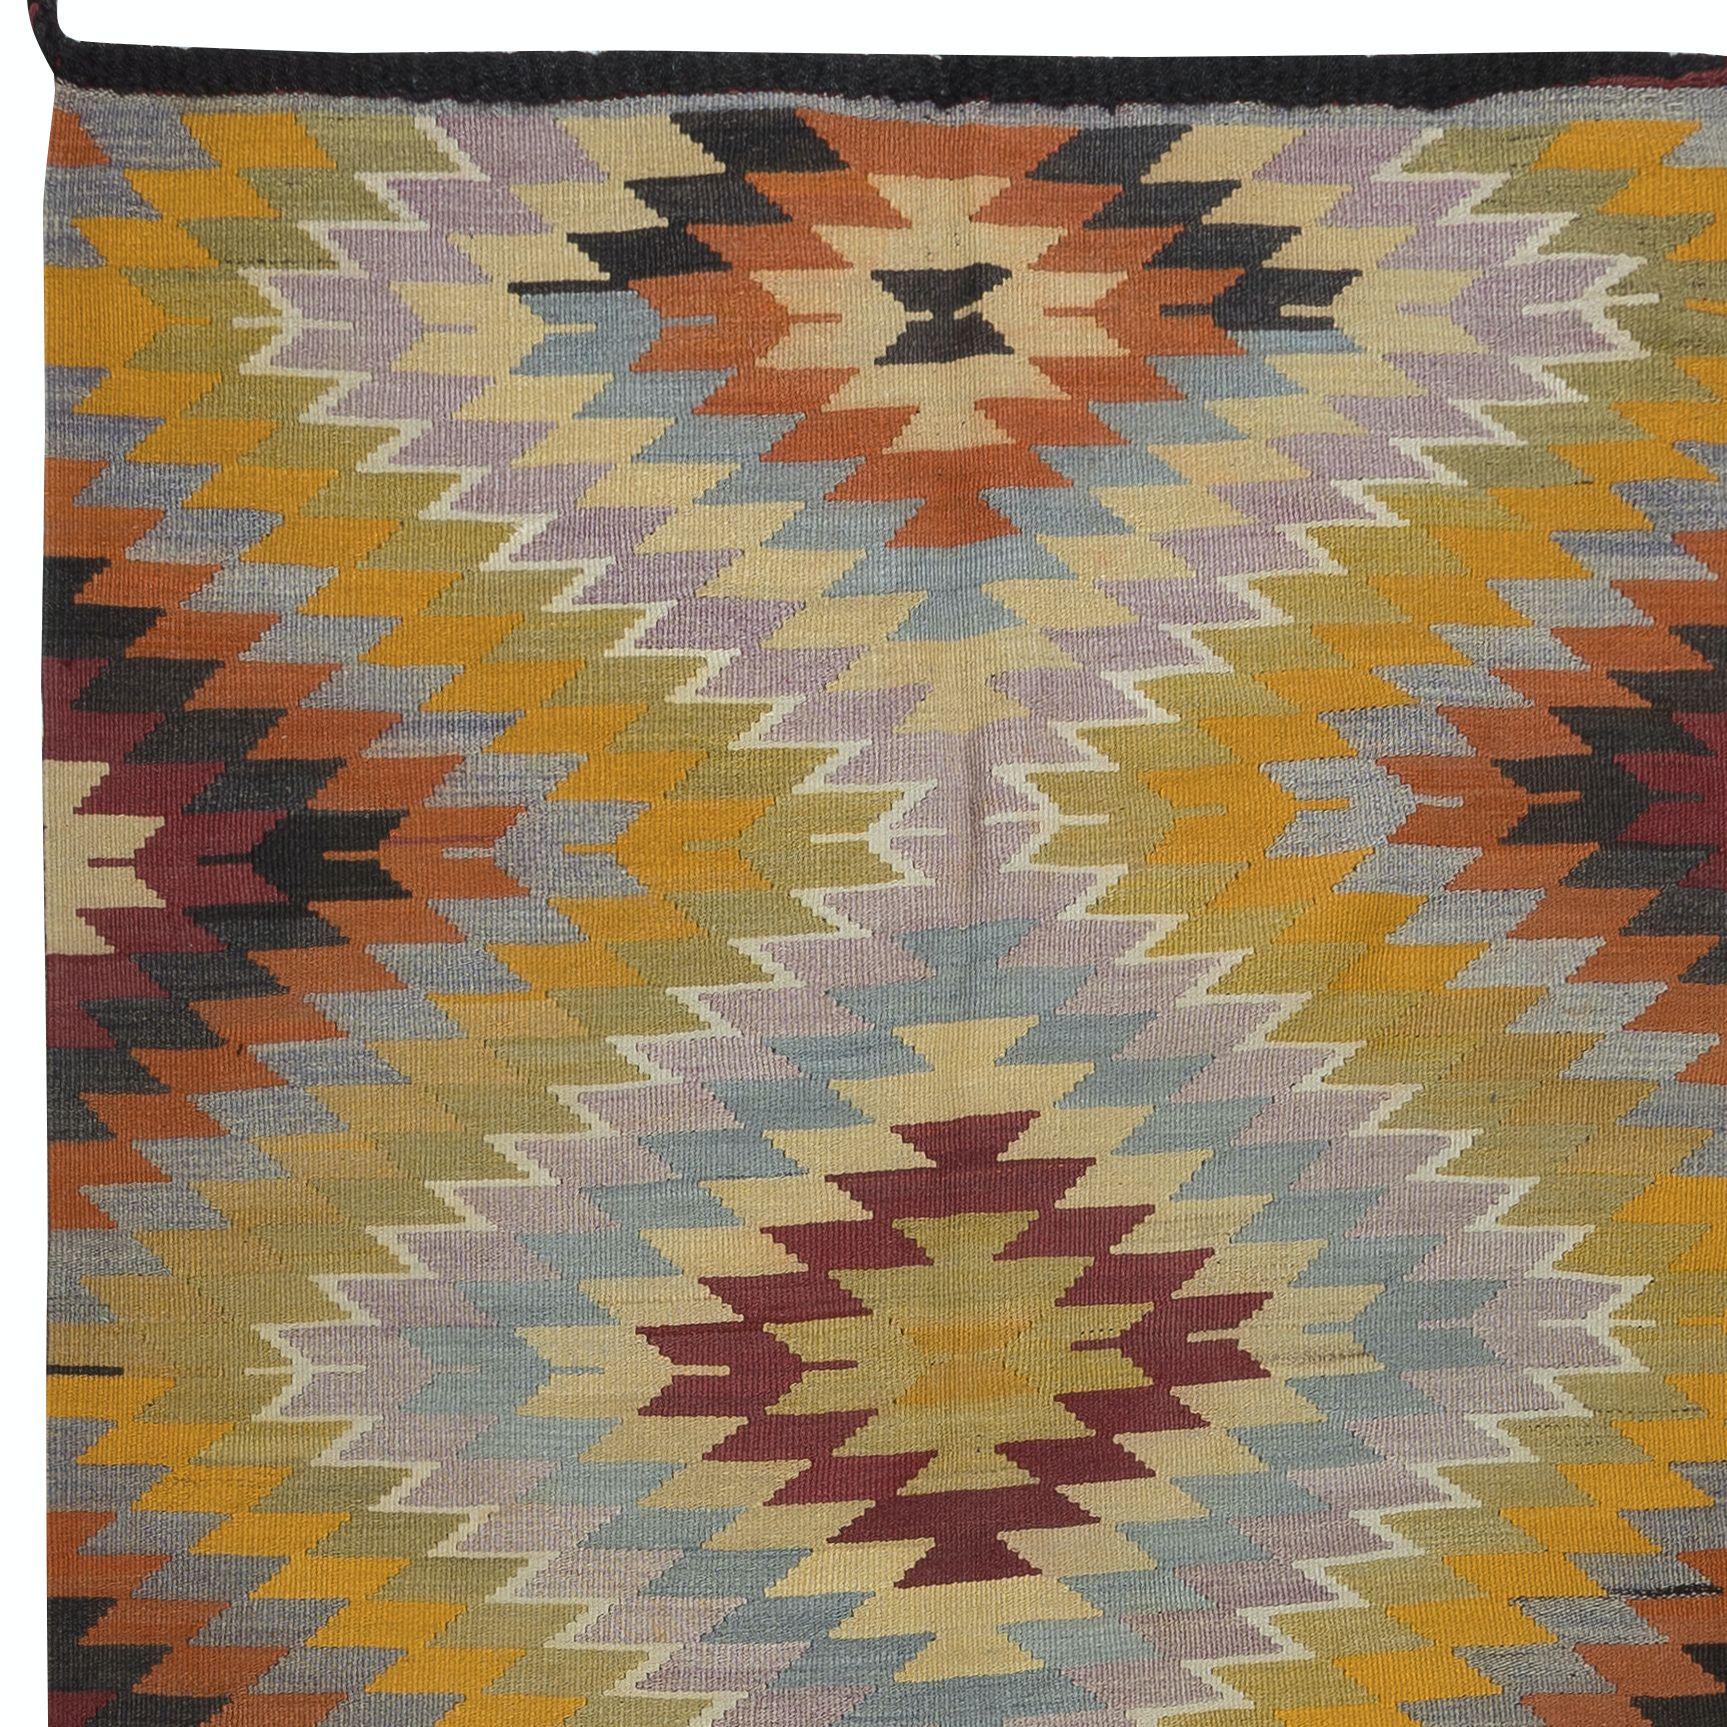 5.5x11 Ft Hand-Woven Turkish Geometric Colorful Kilim, Flat-Weave Rug, All Wool In Good Condition For Sale In Philadelphia, PA